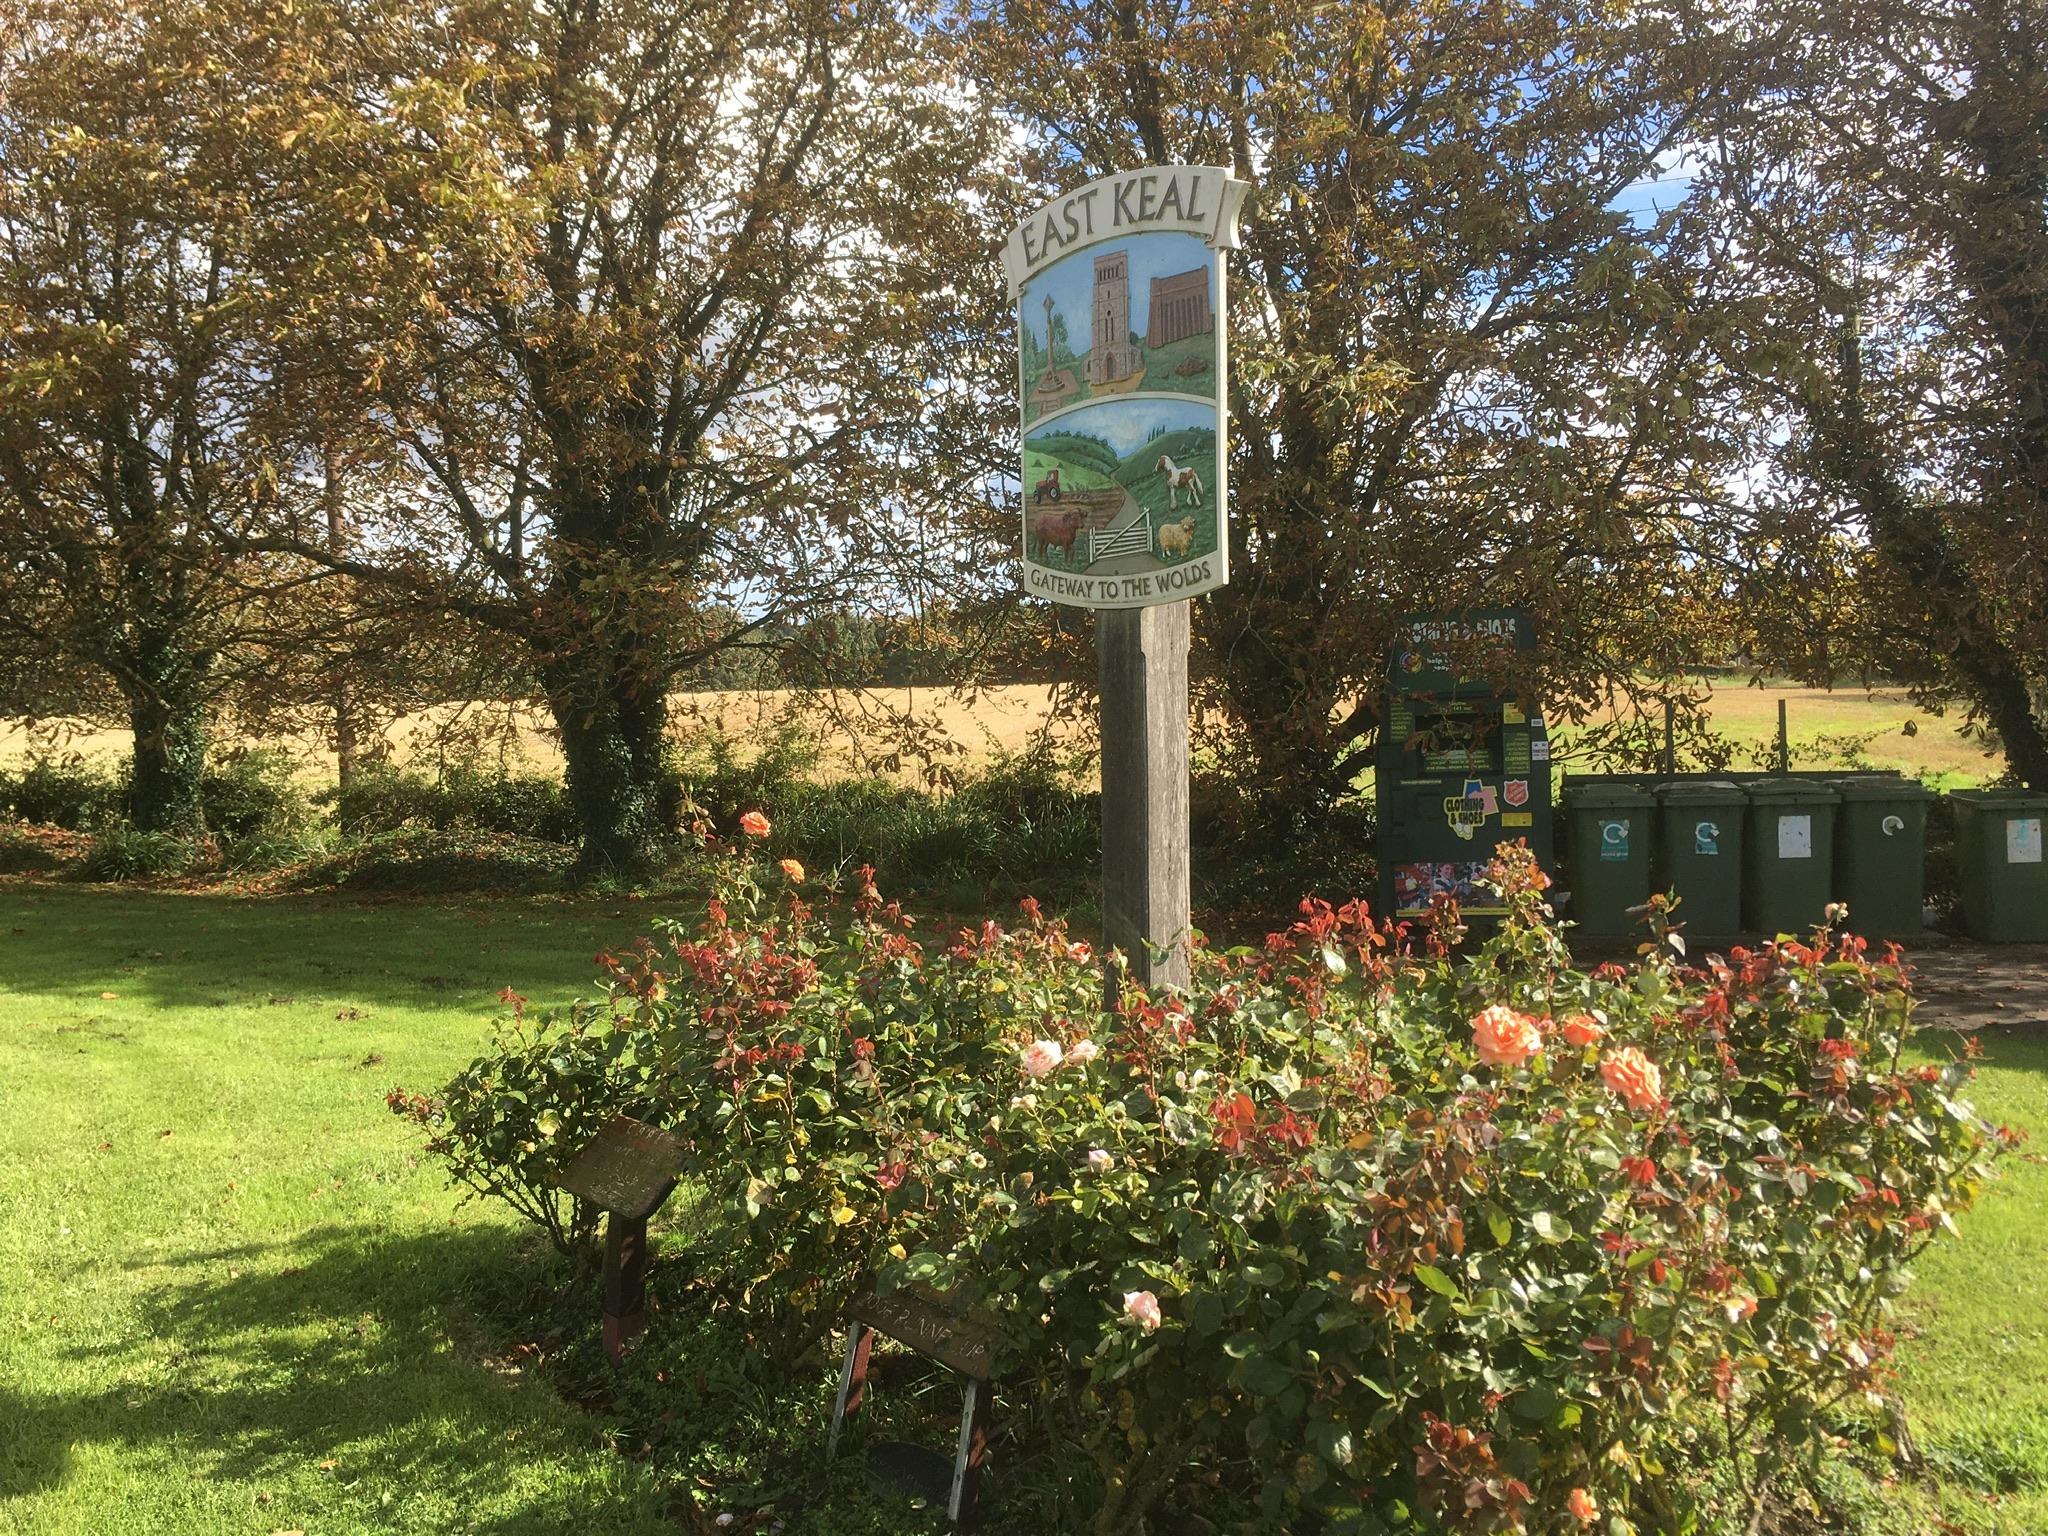 East Keal Village Sign on the green